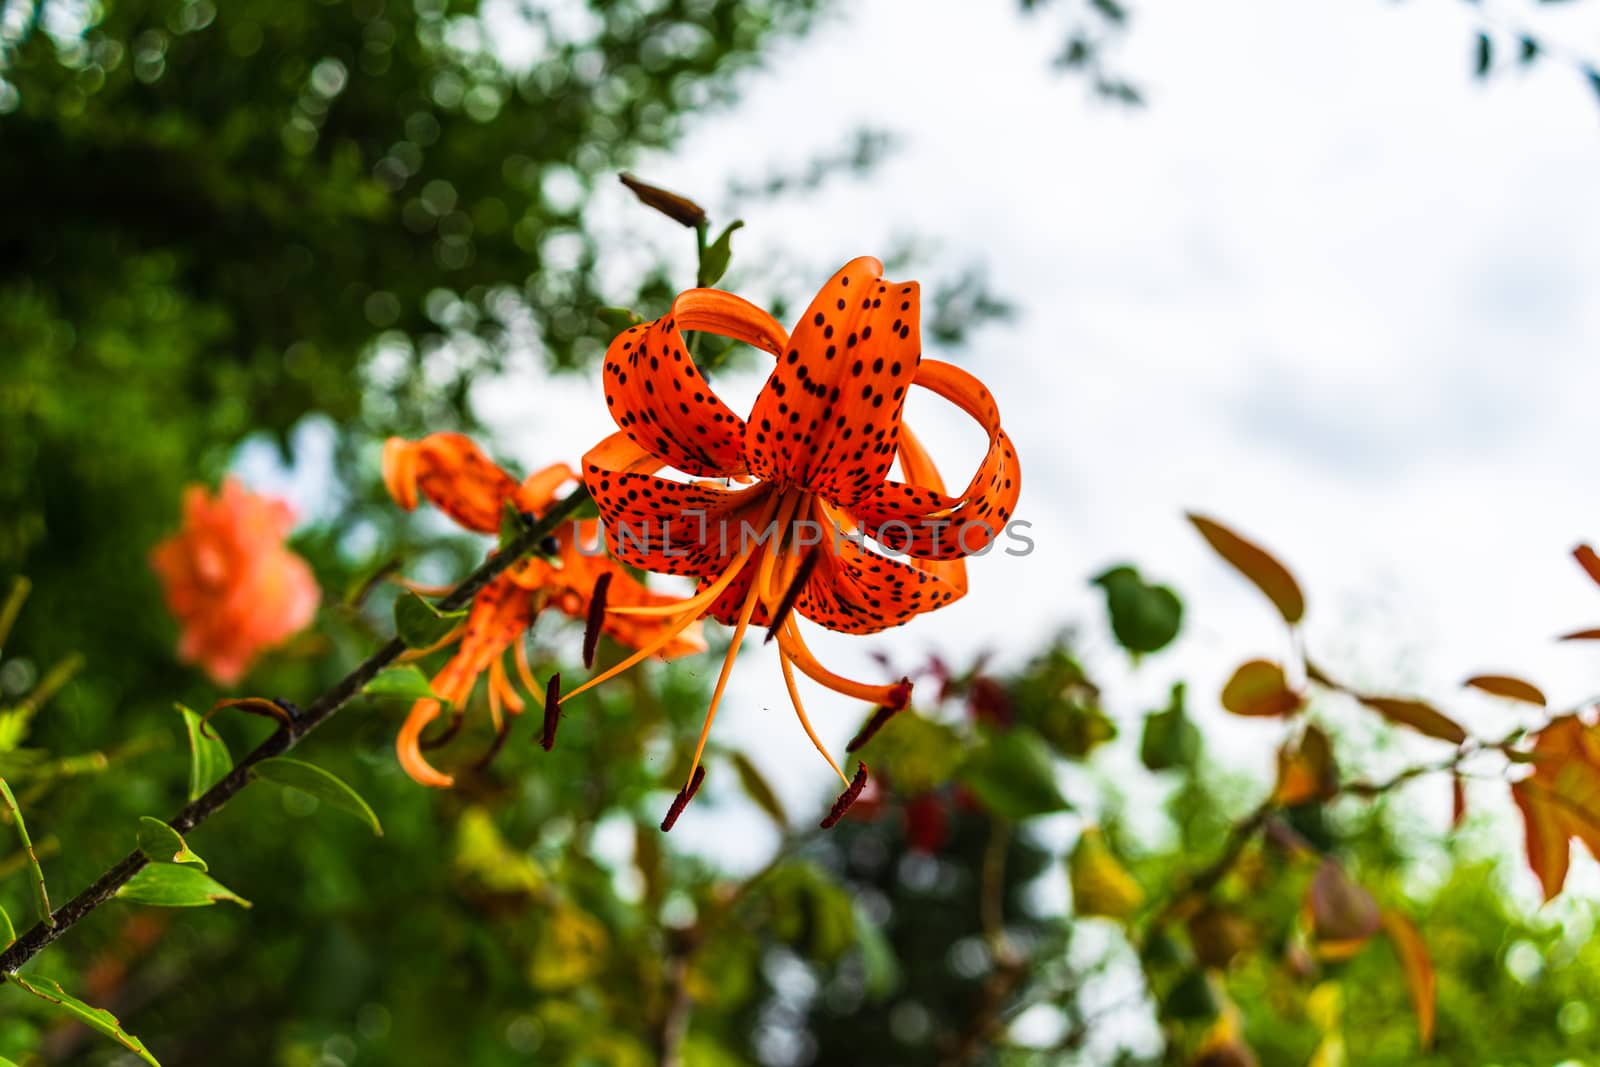 Orange spotted lily (Tiger lily) with green flower buds in the g by vladispas